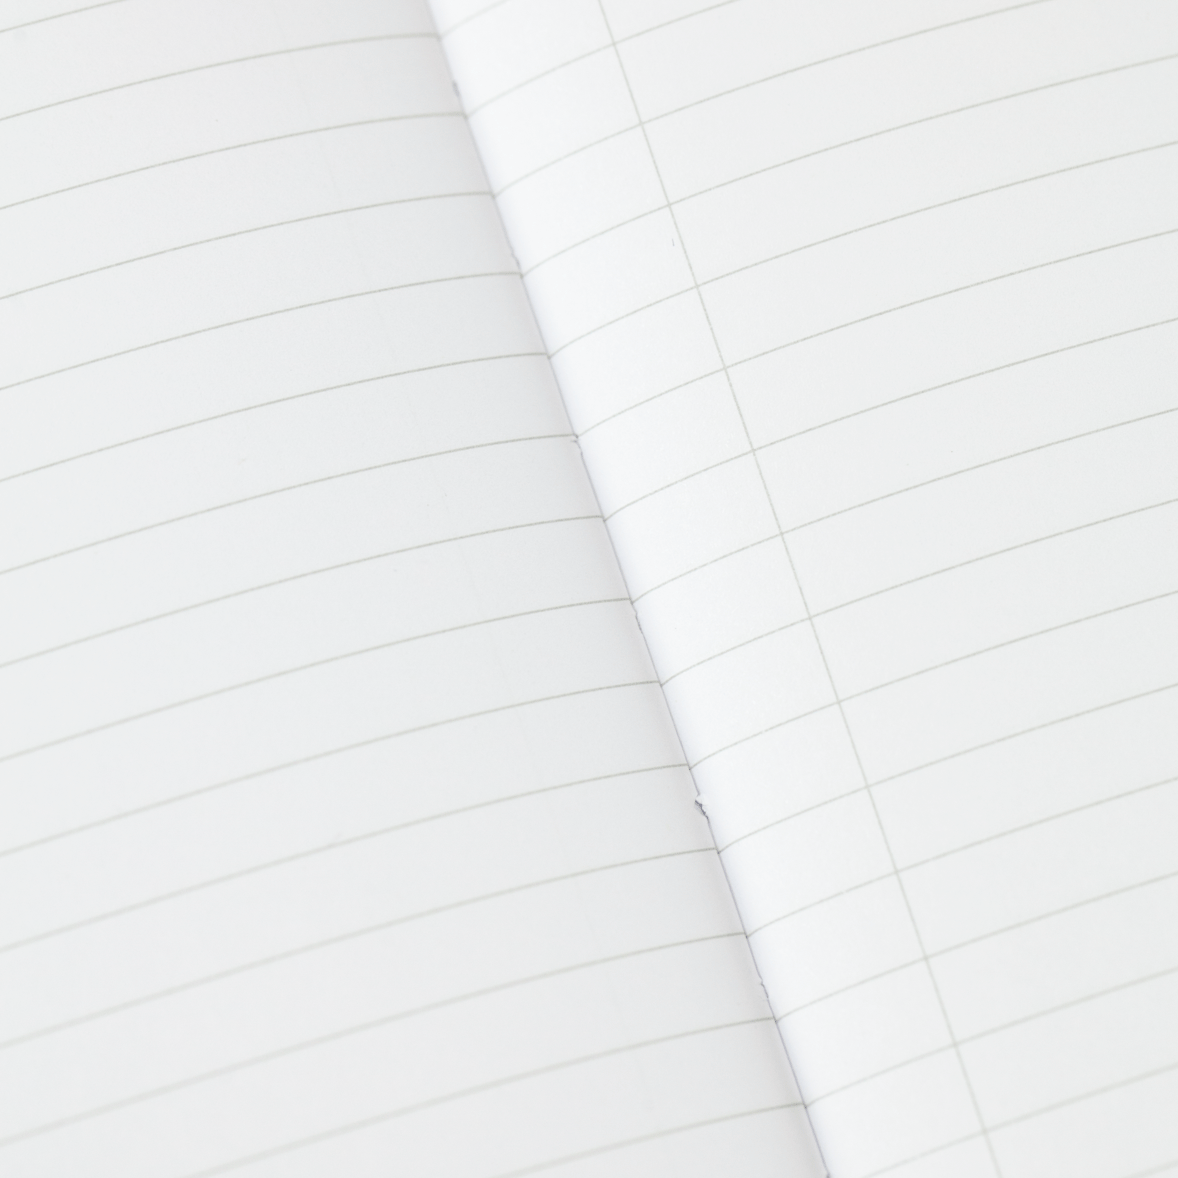 Nursing Softcover Notebook | Lined